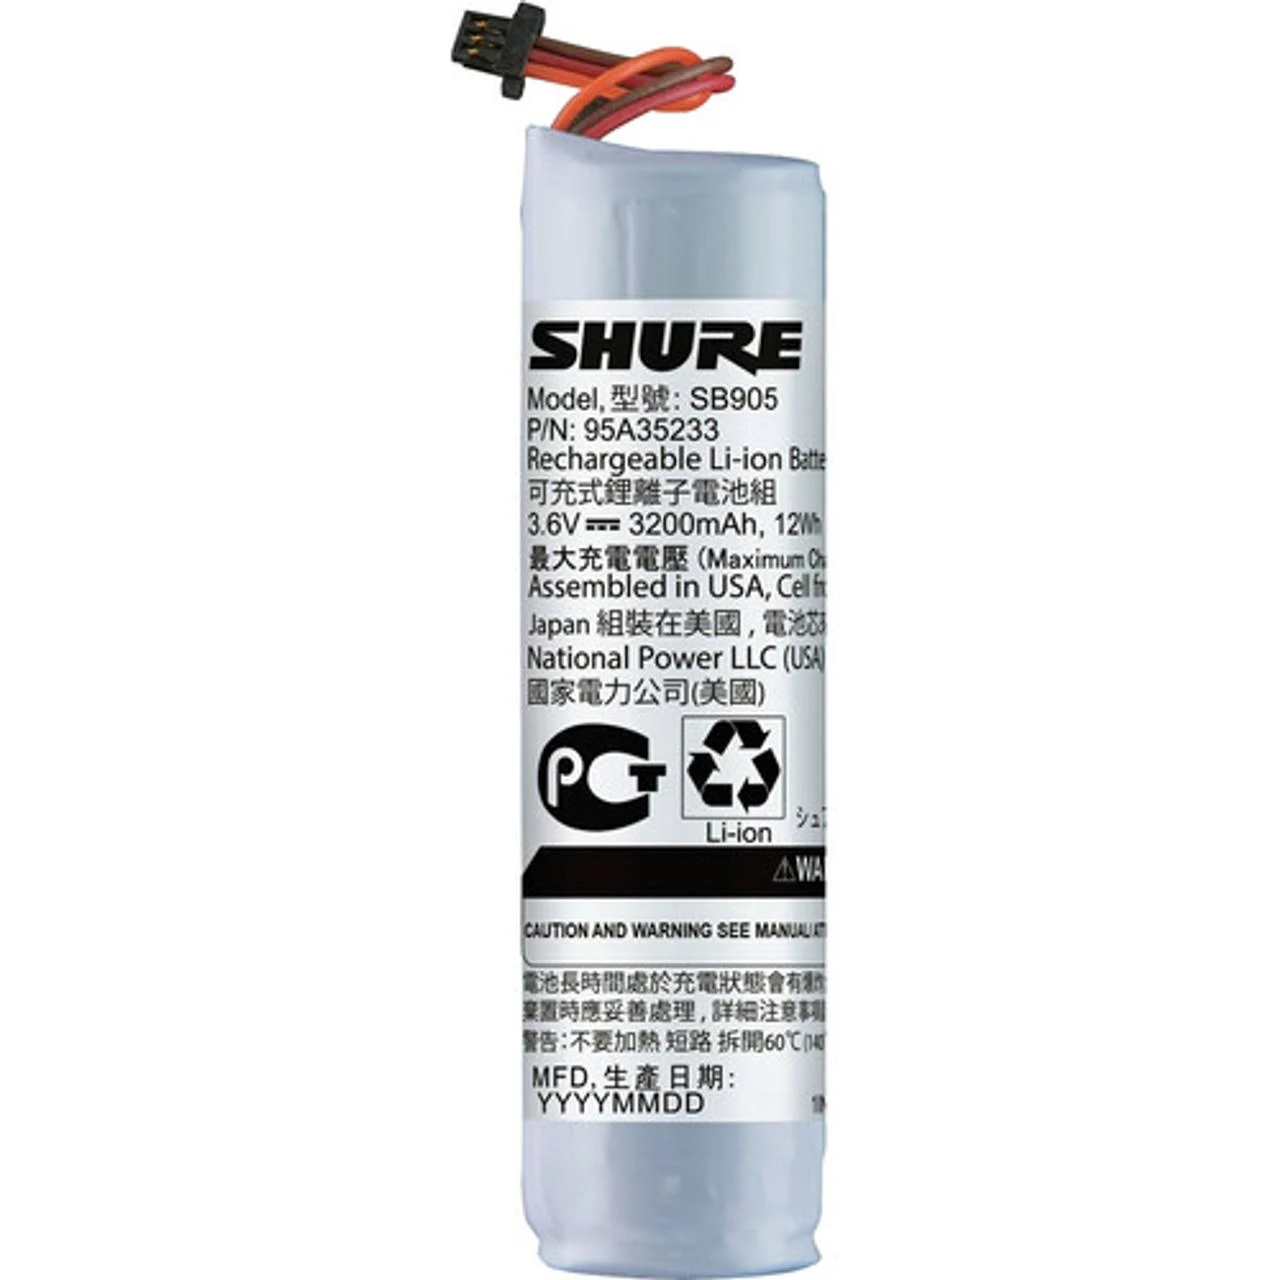 SB905 Lithium-Ion Rechargeable Battery